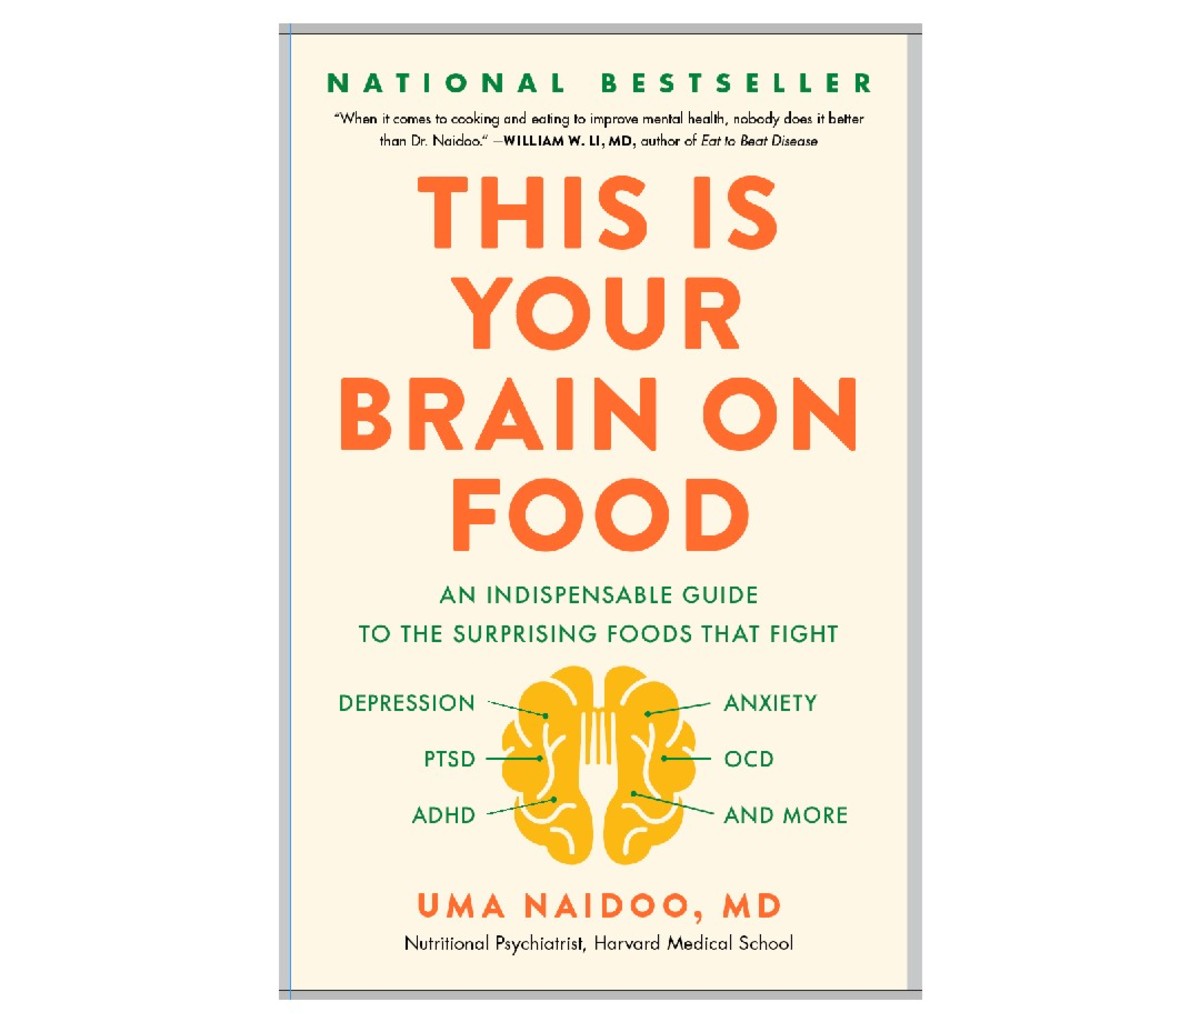 This is Your Brain on Food: An Indispensable Guide to the Surprising Foods that Fight Depression, Anxiety, PTSD, OCD, ADHD, and More by Uma Naidoo, MD